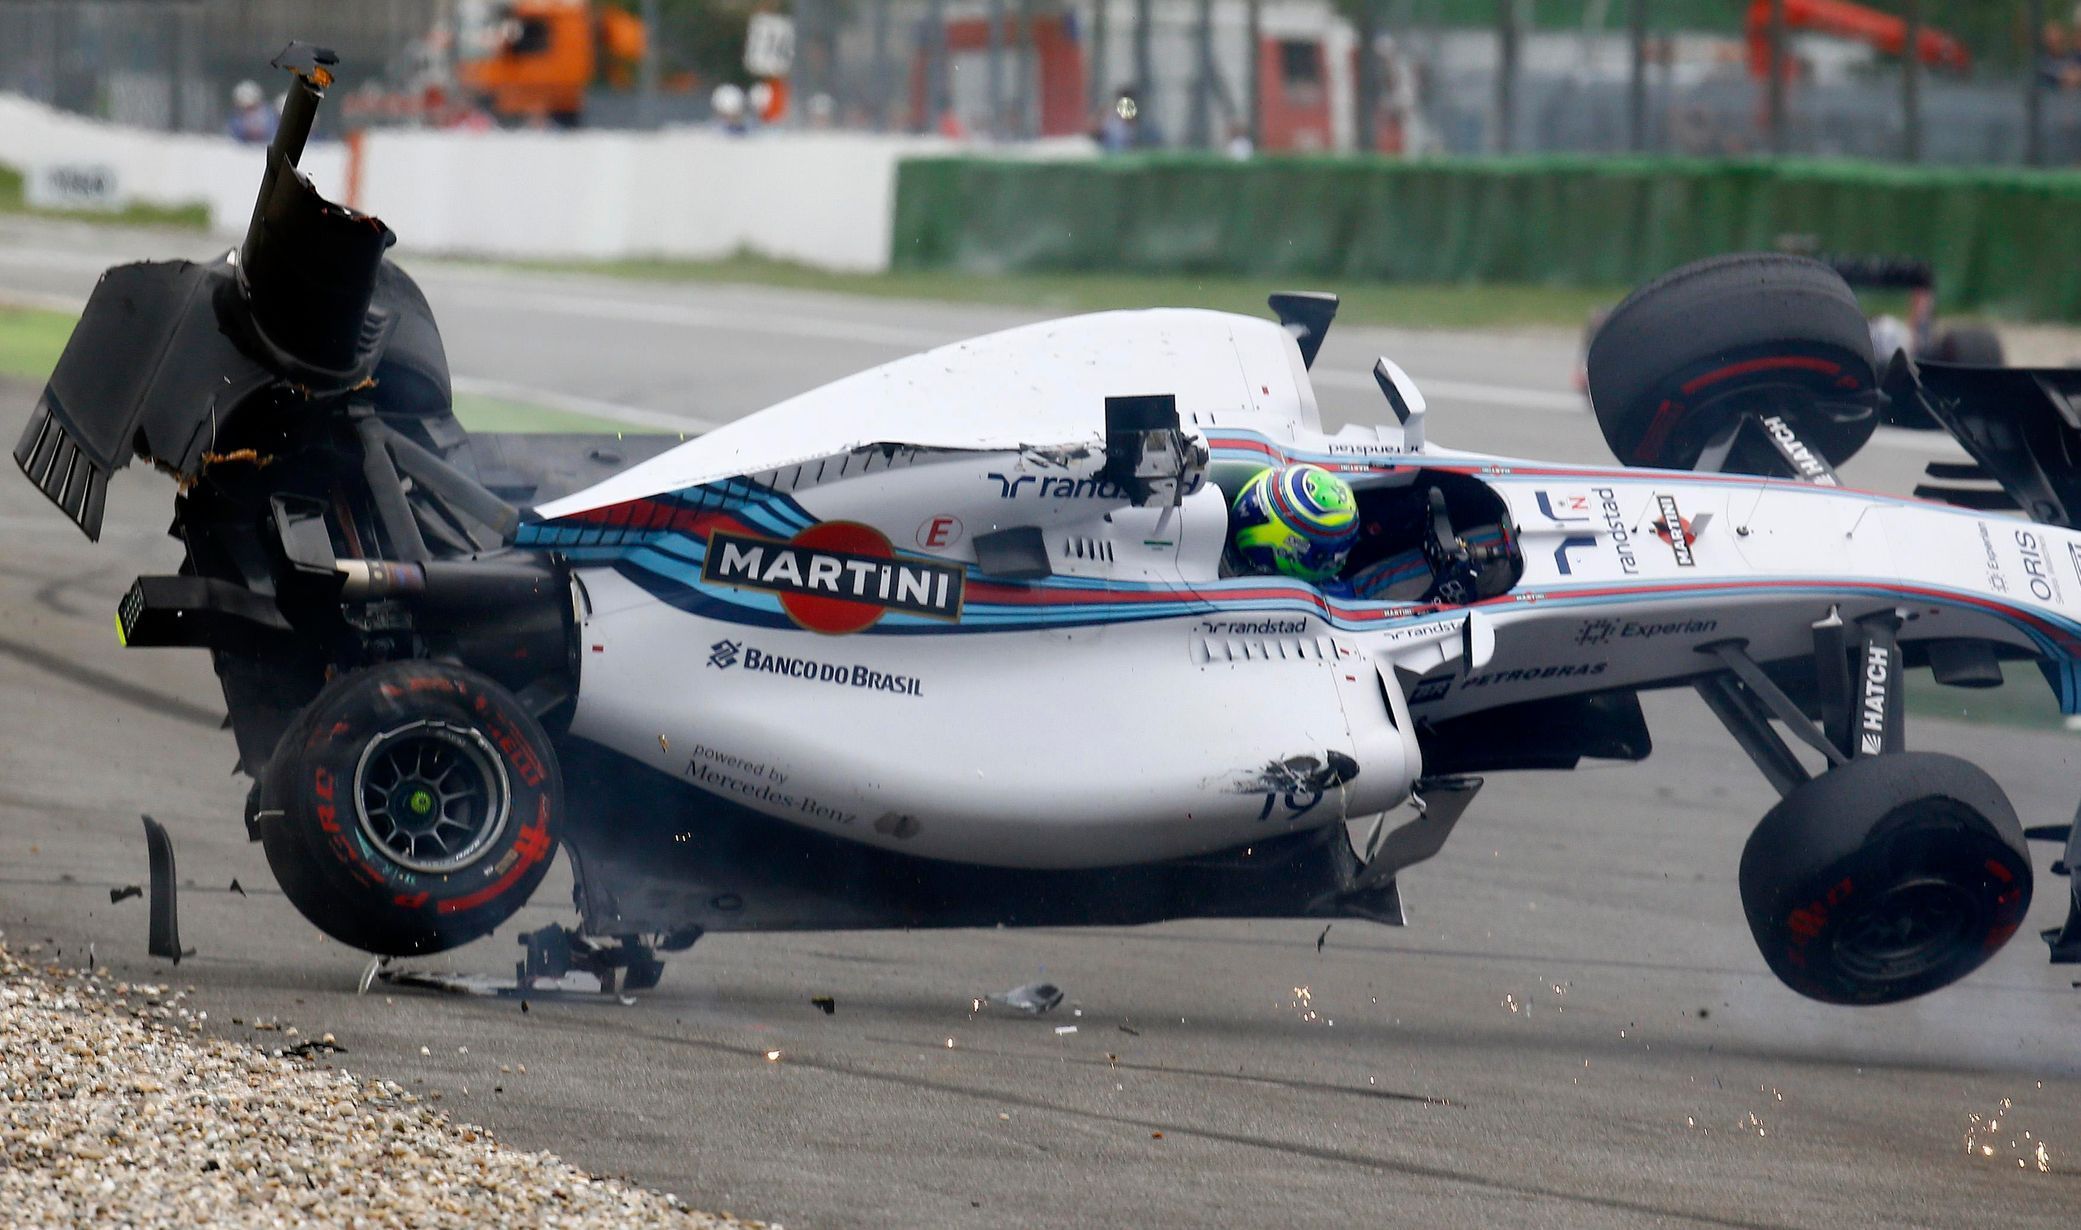 Williams Formula One driver Massa of Brazil crashes with his car in the first corner after the start of the German F1 Grand Prix at the Hockenheim racing circuit